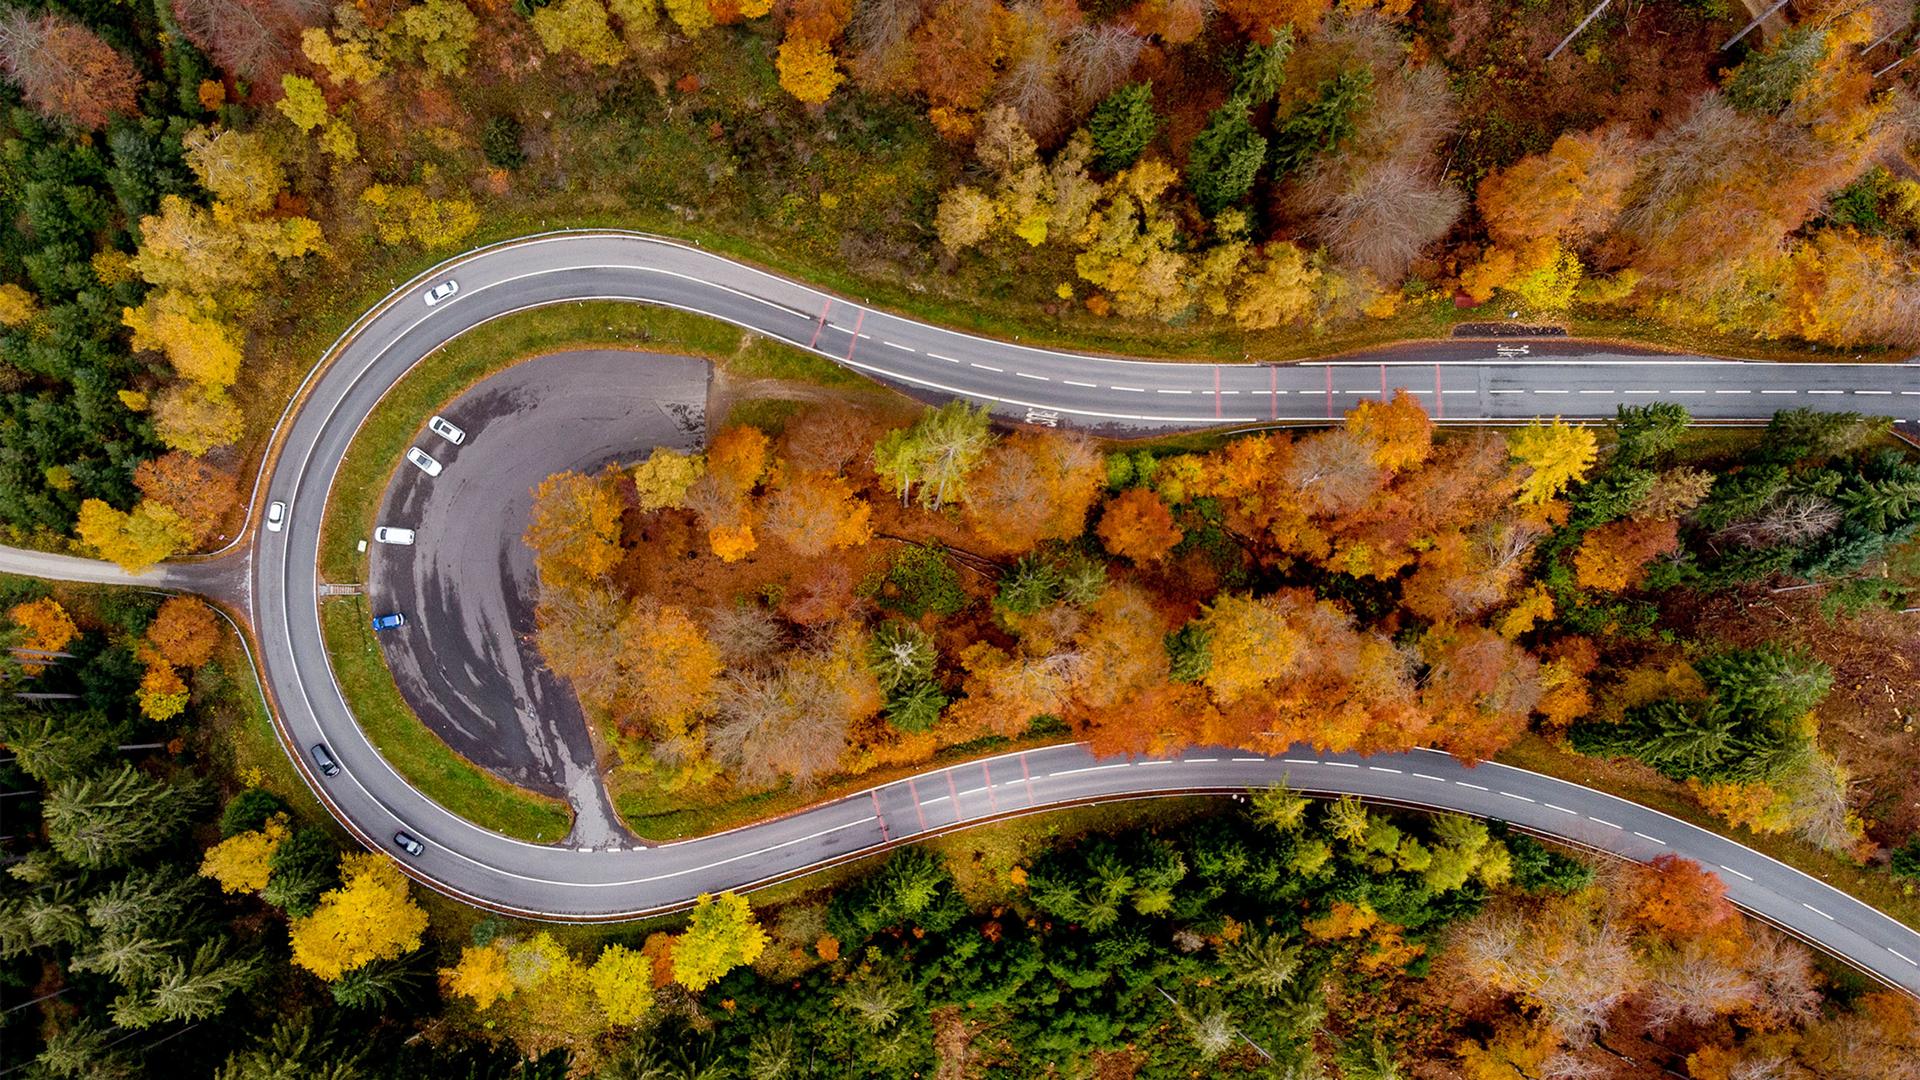 Colorful trees stand near a road through the Taunus region near Frankfurt, Oct. 2, 2021. More than 100 countries are pledging to end deforestation at COP26 in Glasgow.